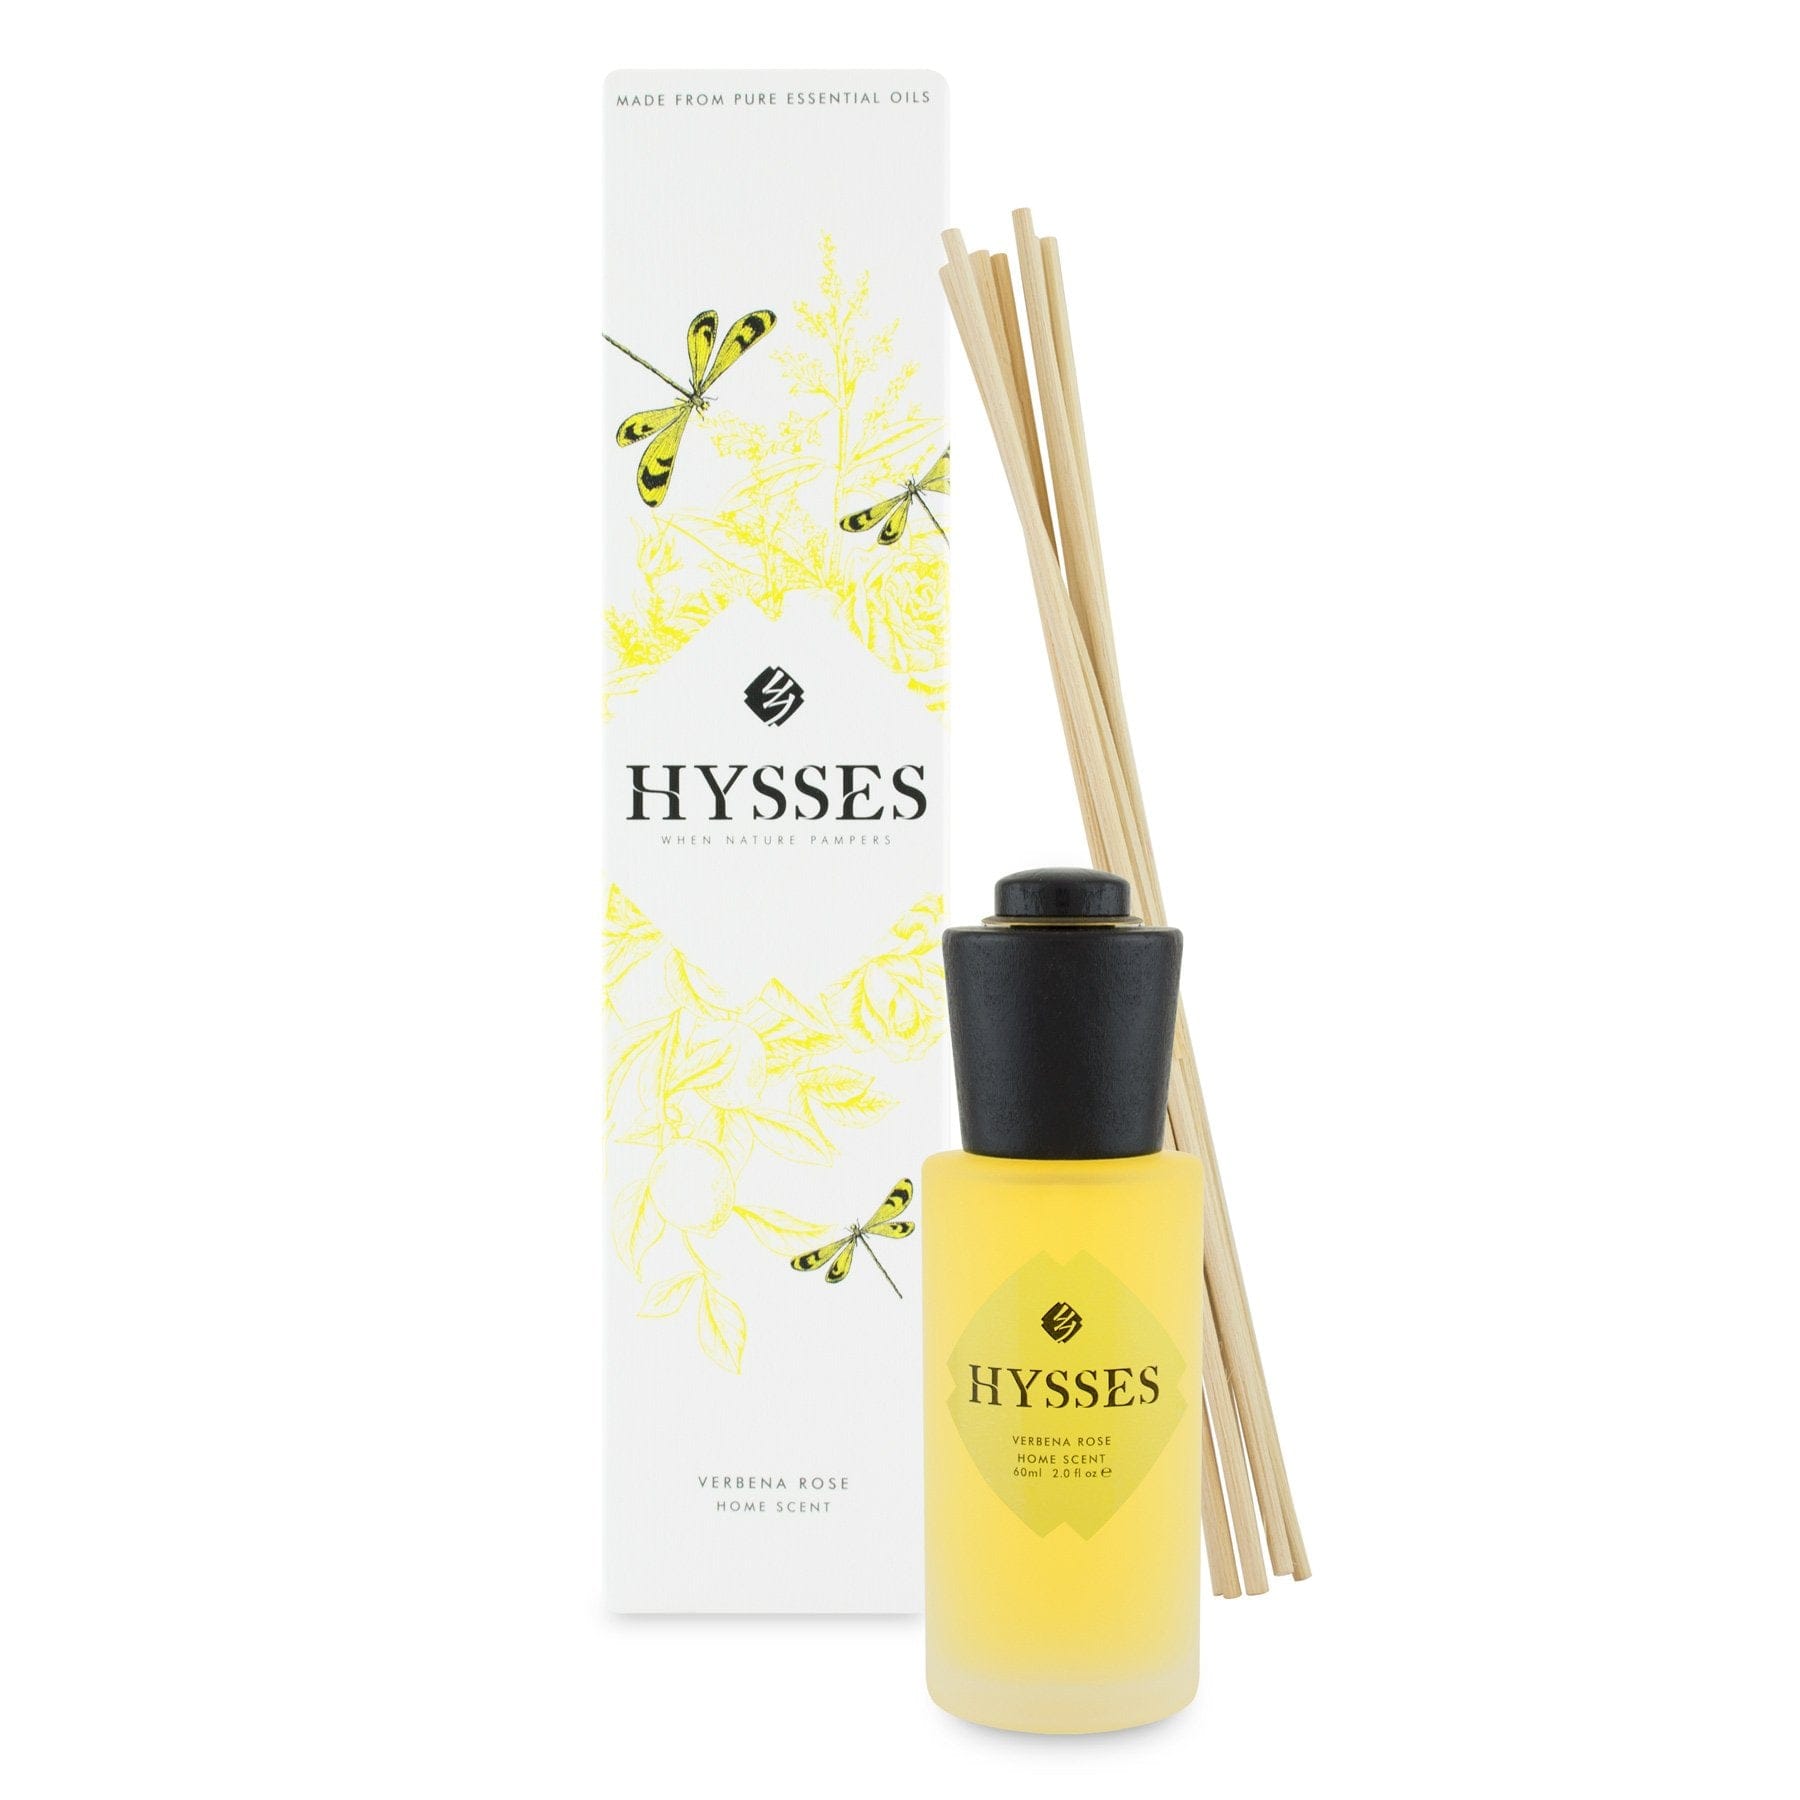 Hysses Home Scents 60ml Home Scent Reed Diffuser Verbena Rose